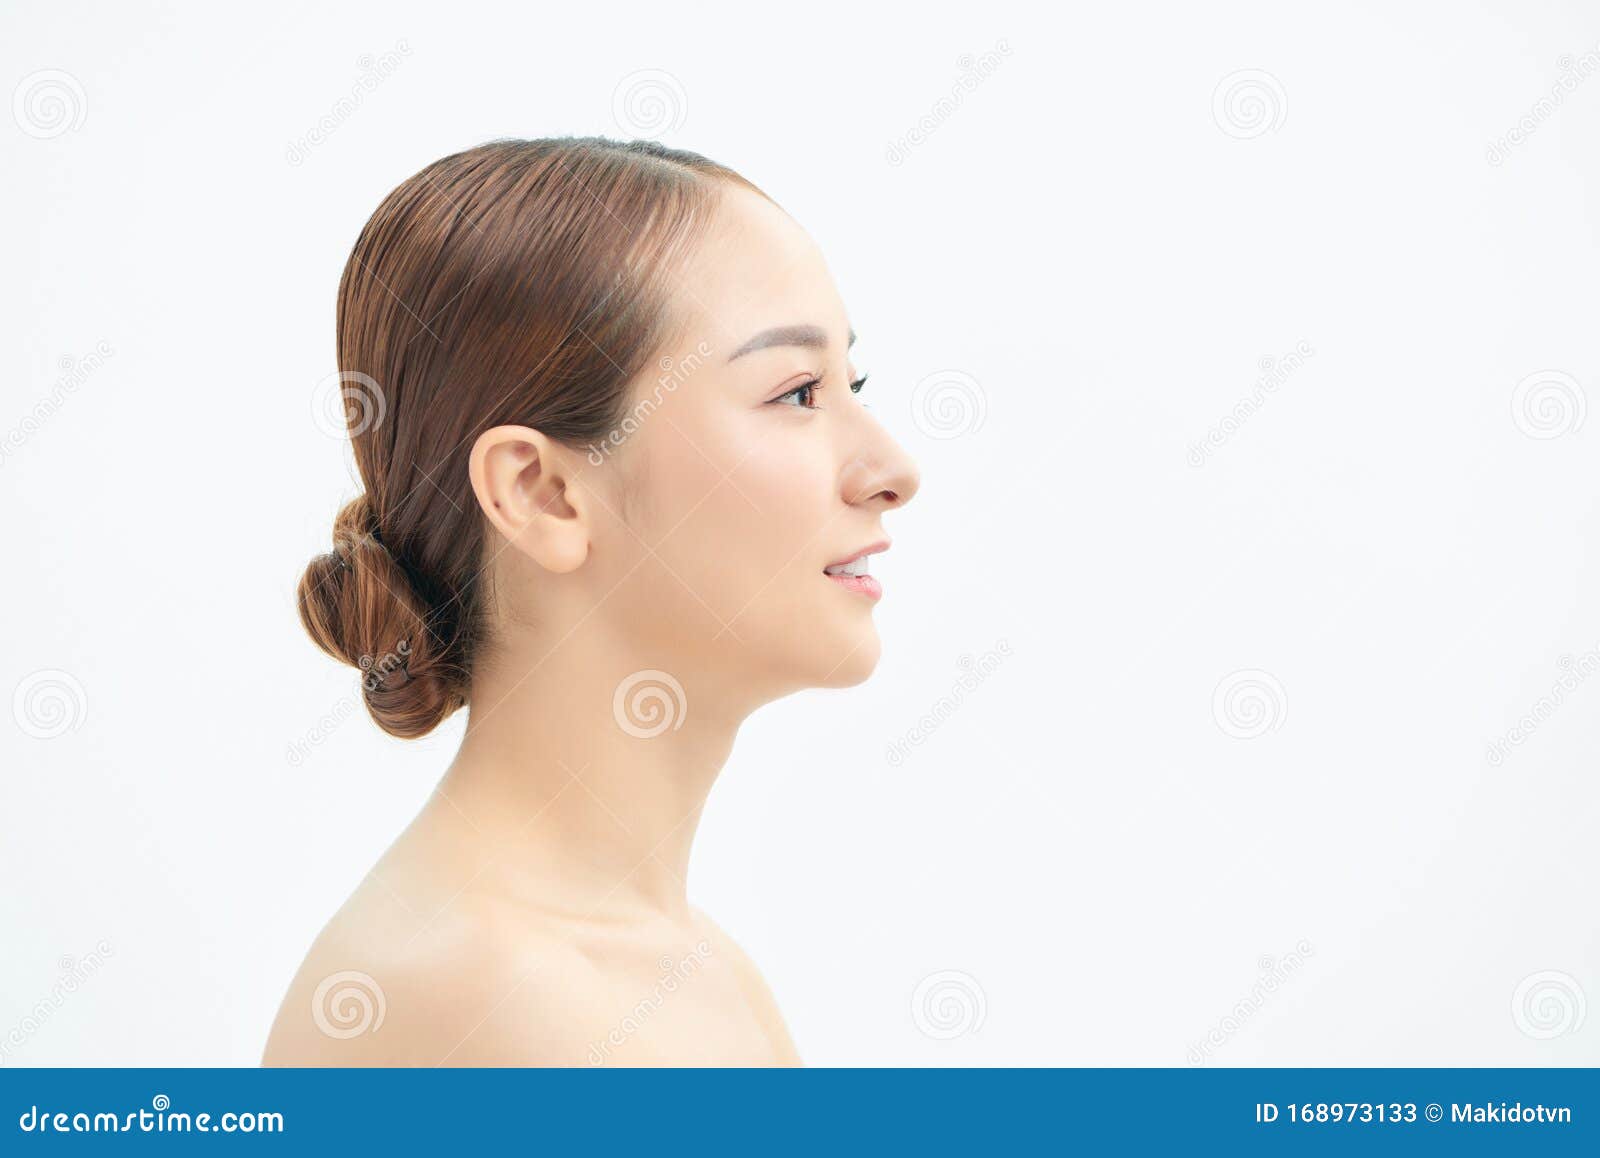 Beauty Portrait Of A Young Pretty Half Naked Woman Stock 